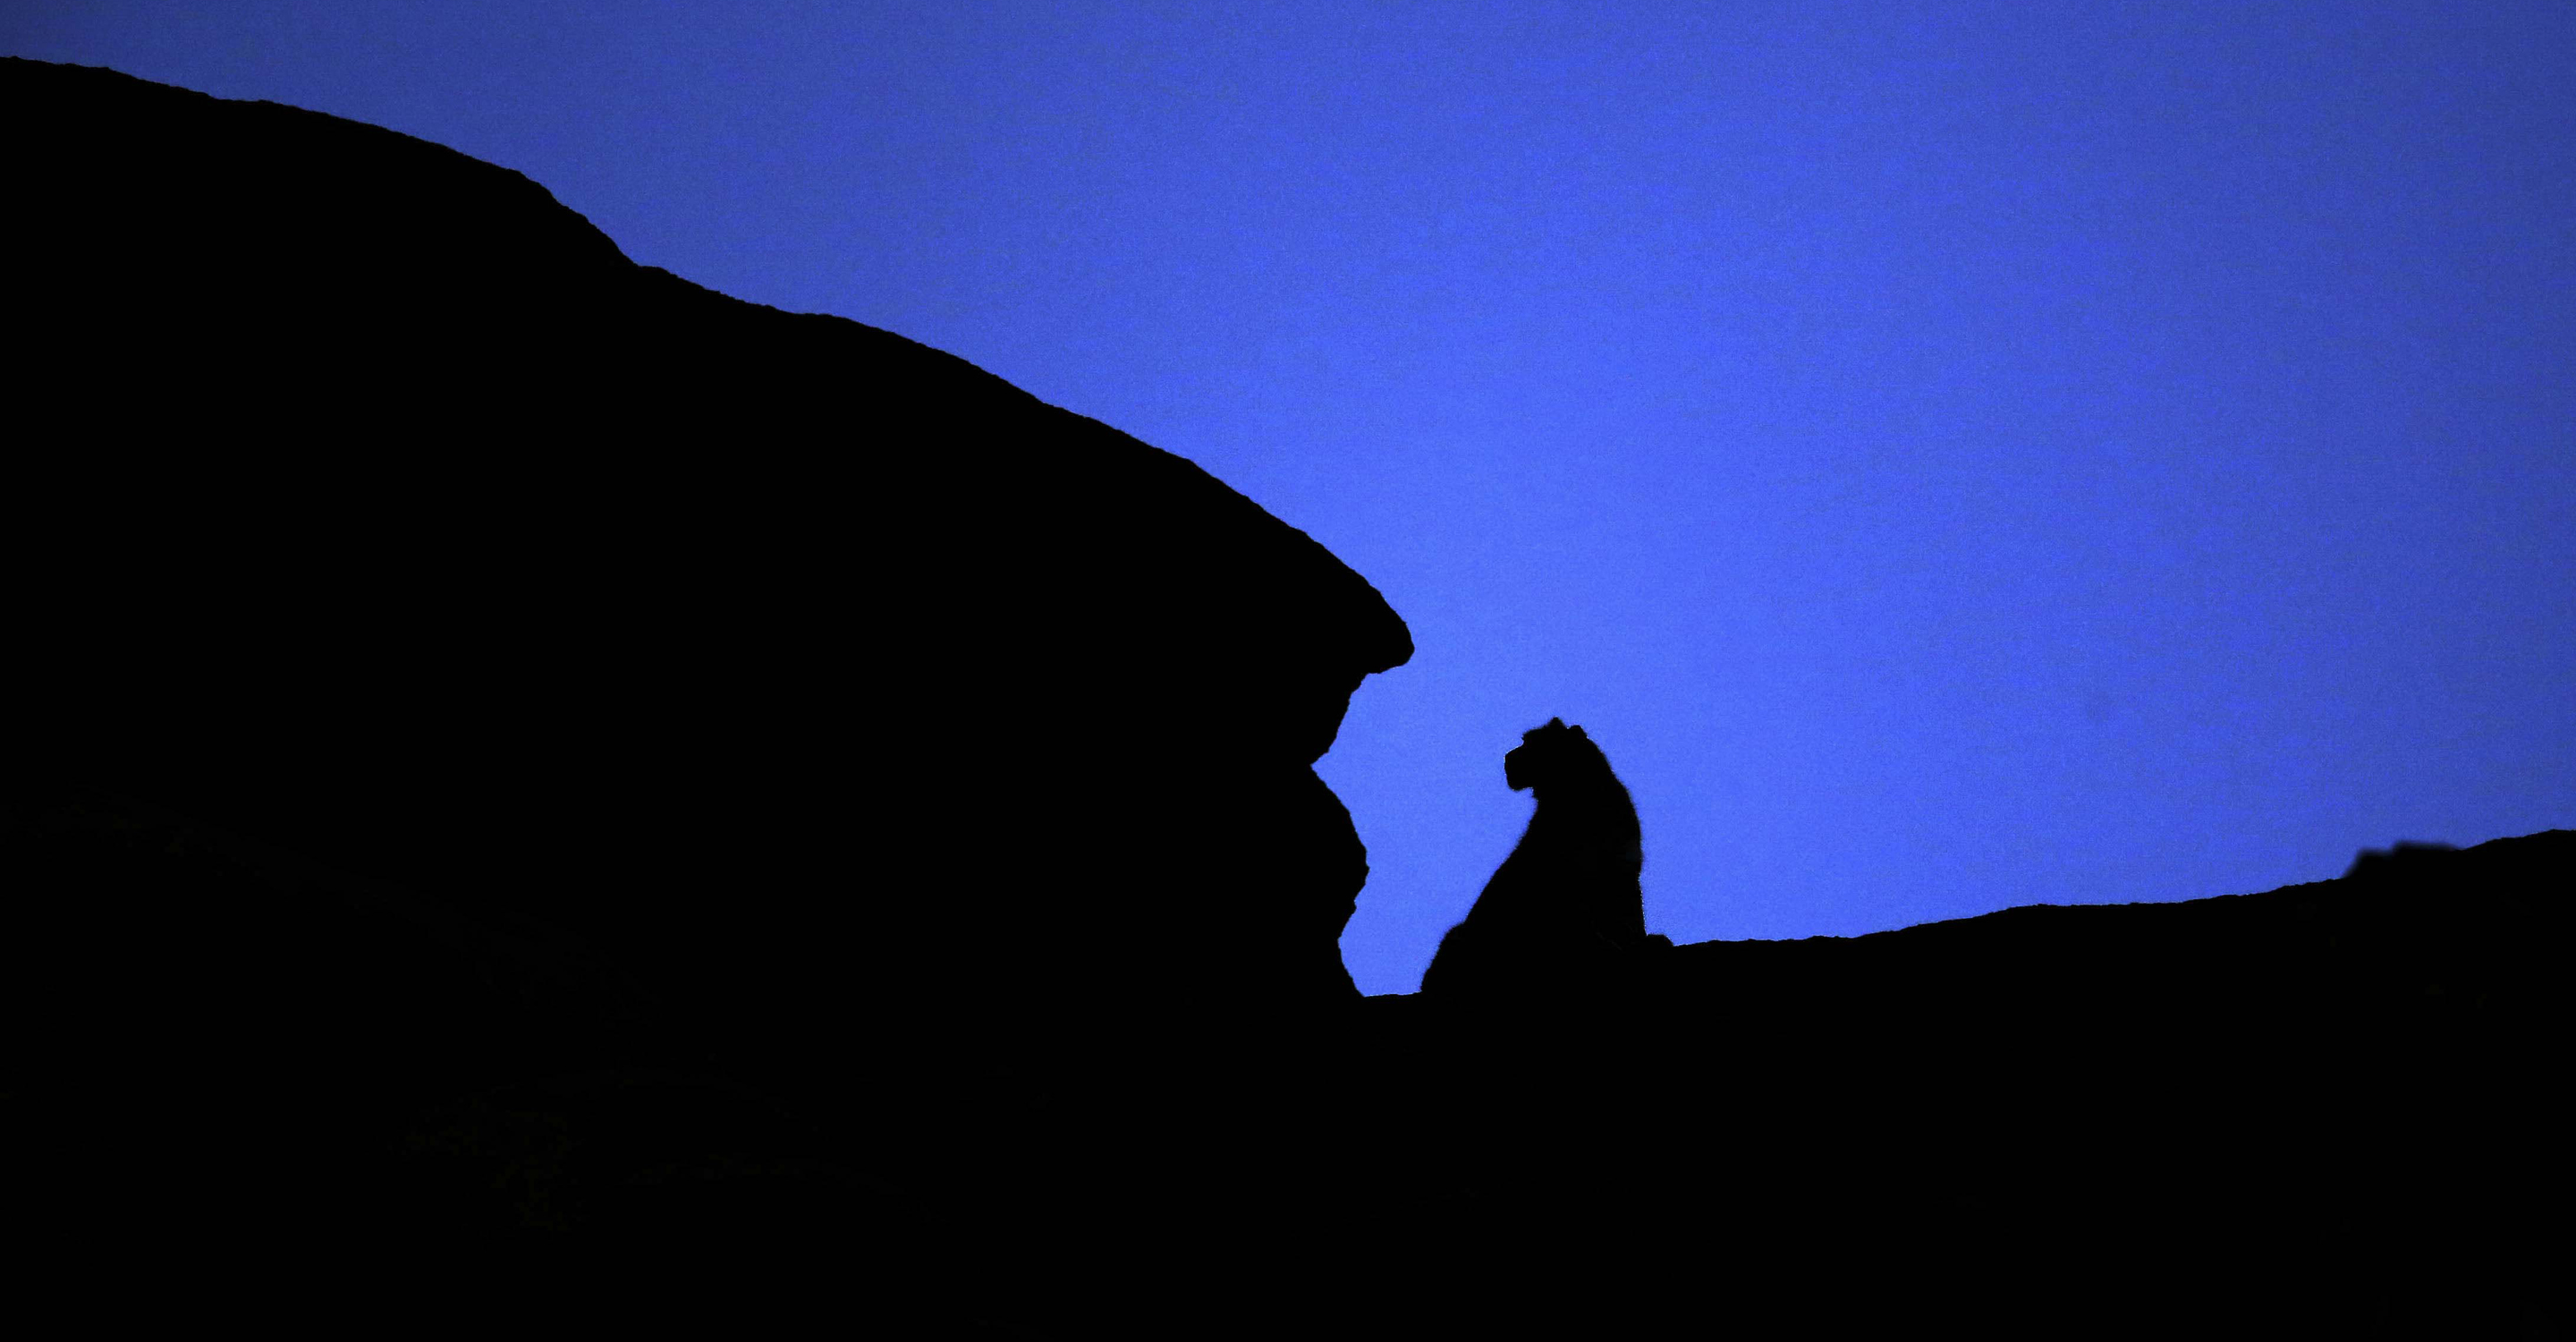 A silhouette of a sitting snow leopard at dusk in Ladakh, India